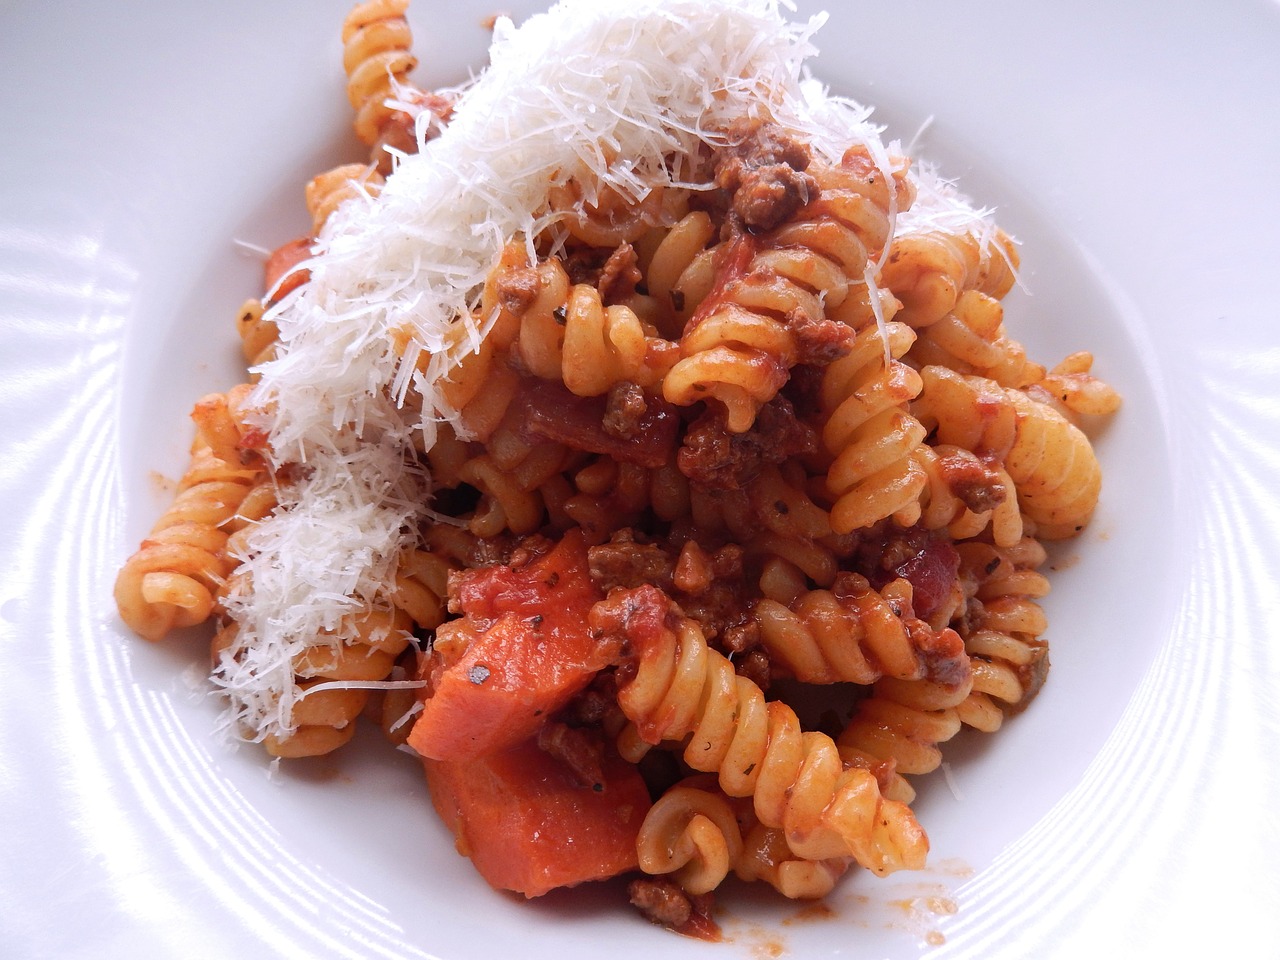 Pasta With Ground Beef and Yoghurt